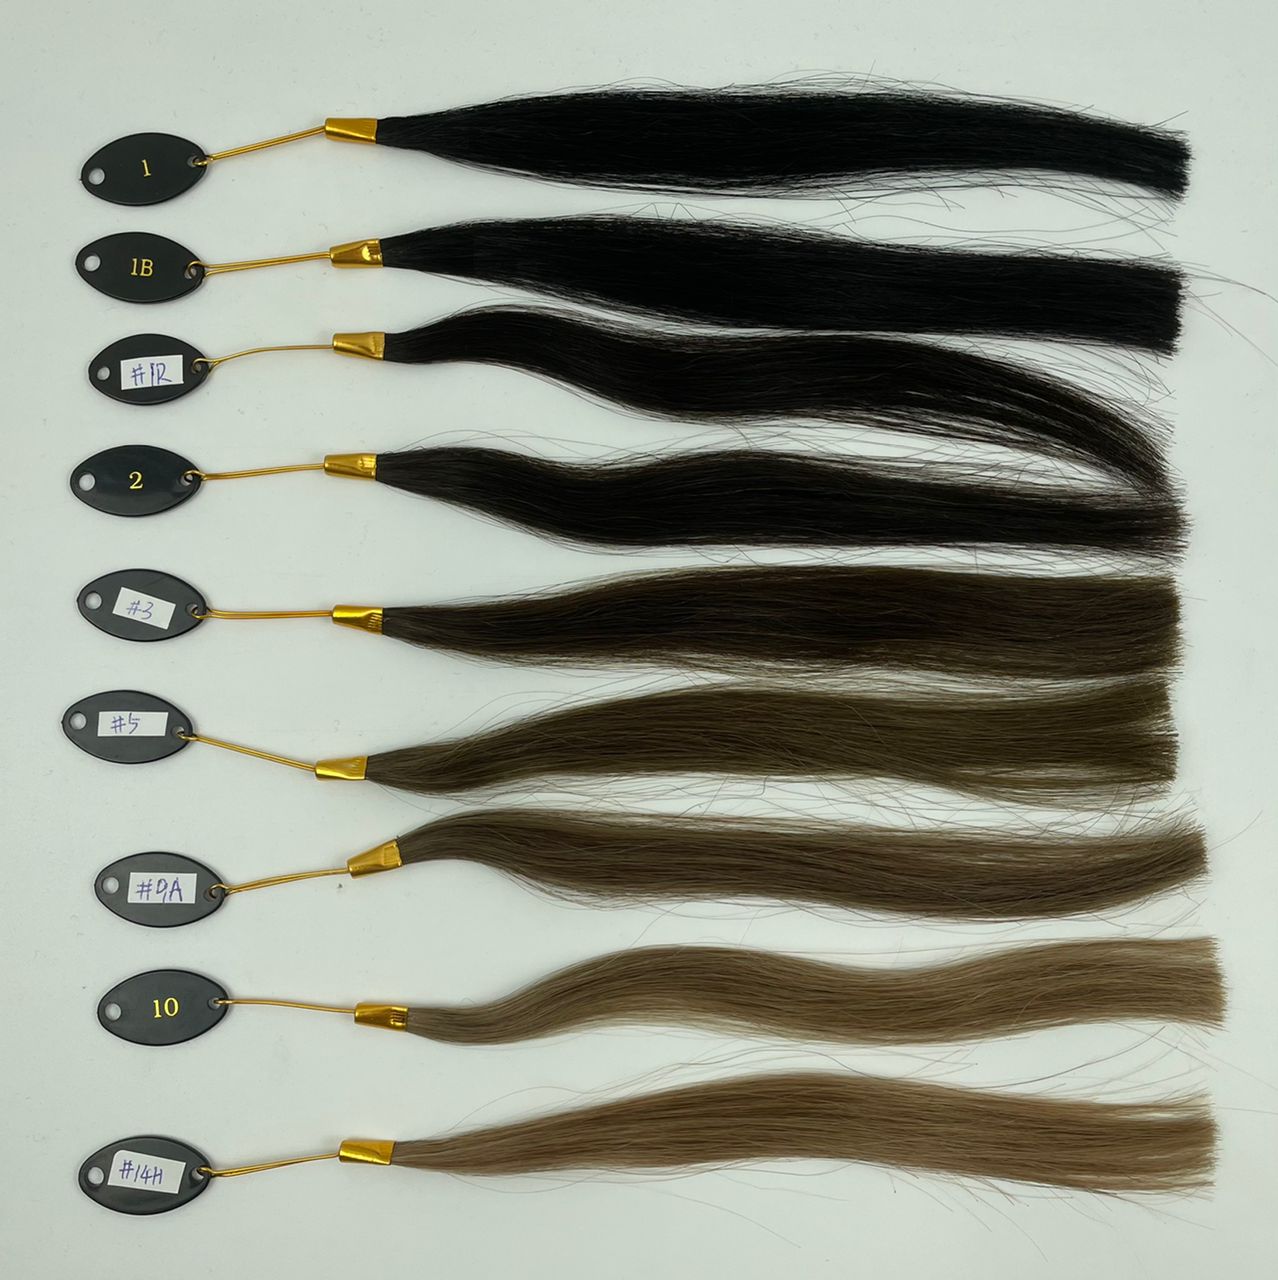 100% Unprocessed Human Hair Luxury Clip-in Extensions